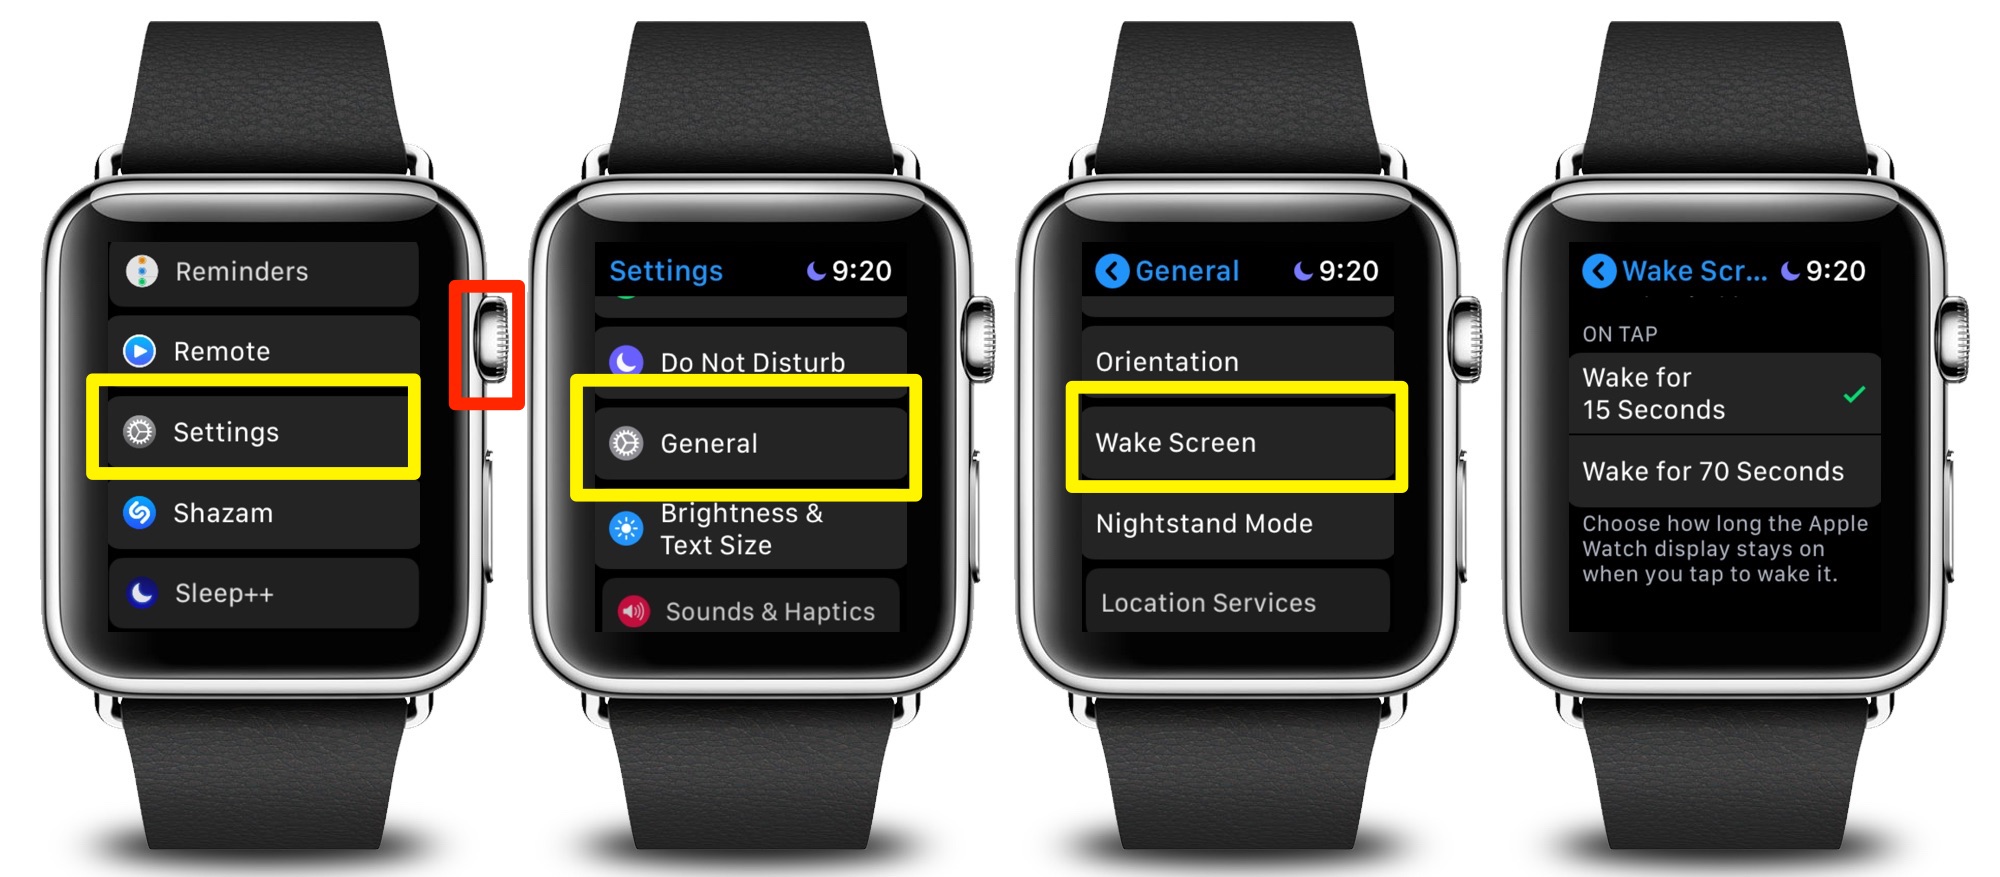 How To Adjust the Length of the 'Tap to Wake' Time for Your Apple Watch's Display